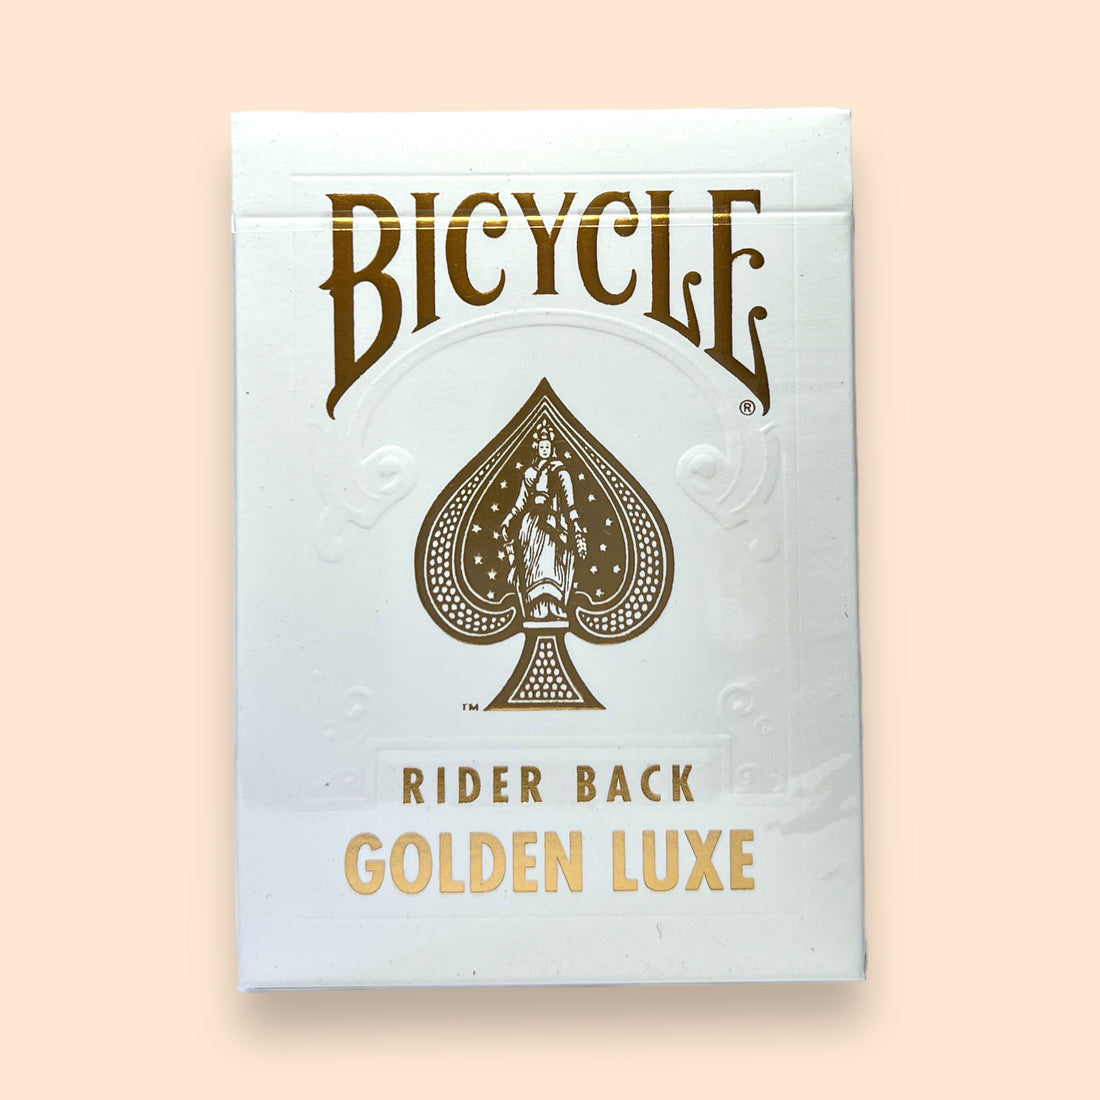 Bicycle Golden Luxe Rider Back Gold MetalLuxe Foil Playing Cards